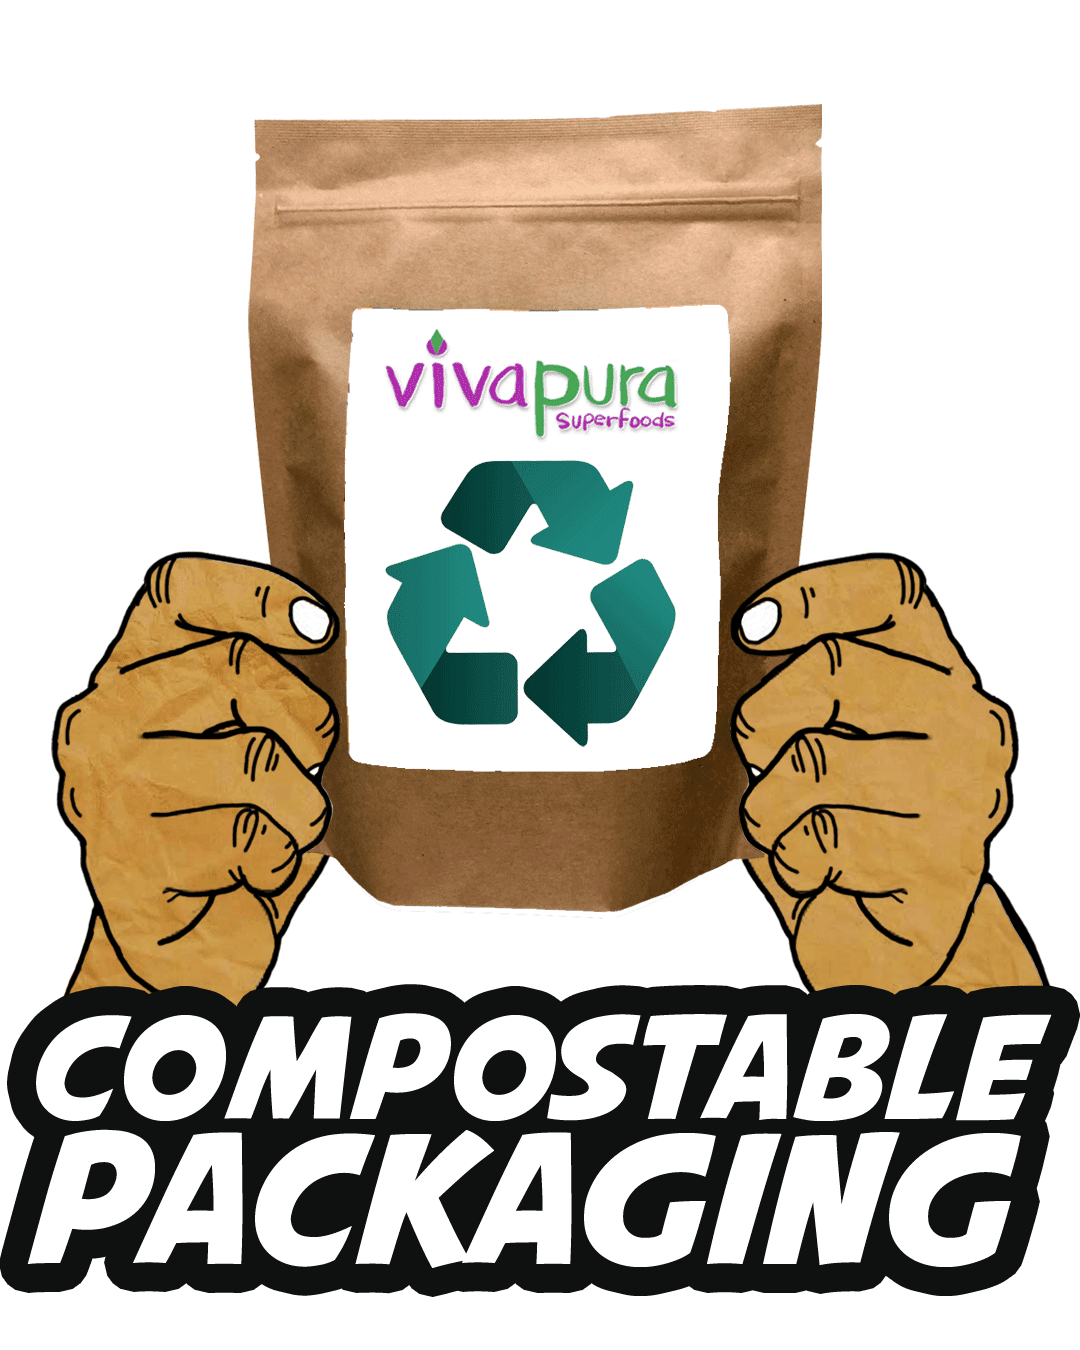 100% Compostable Packaging that works.